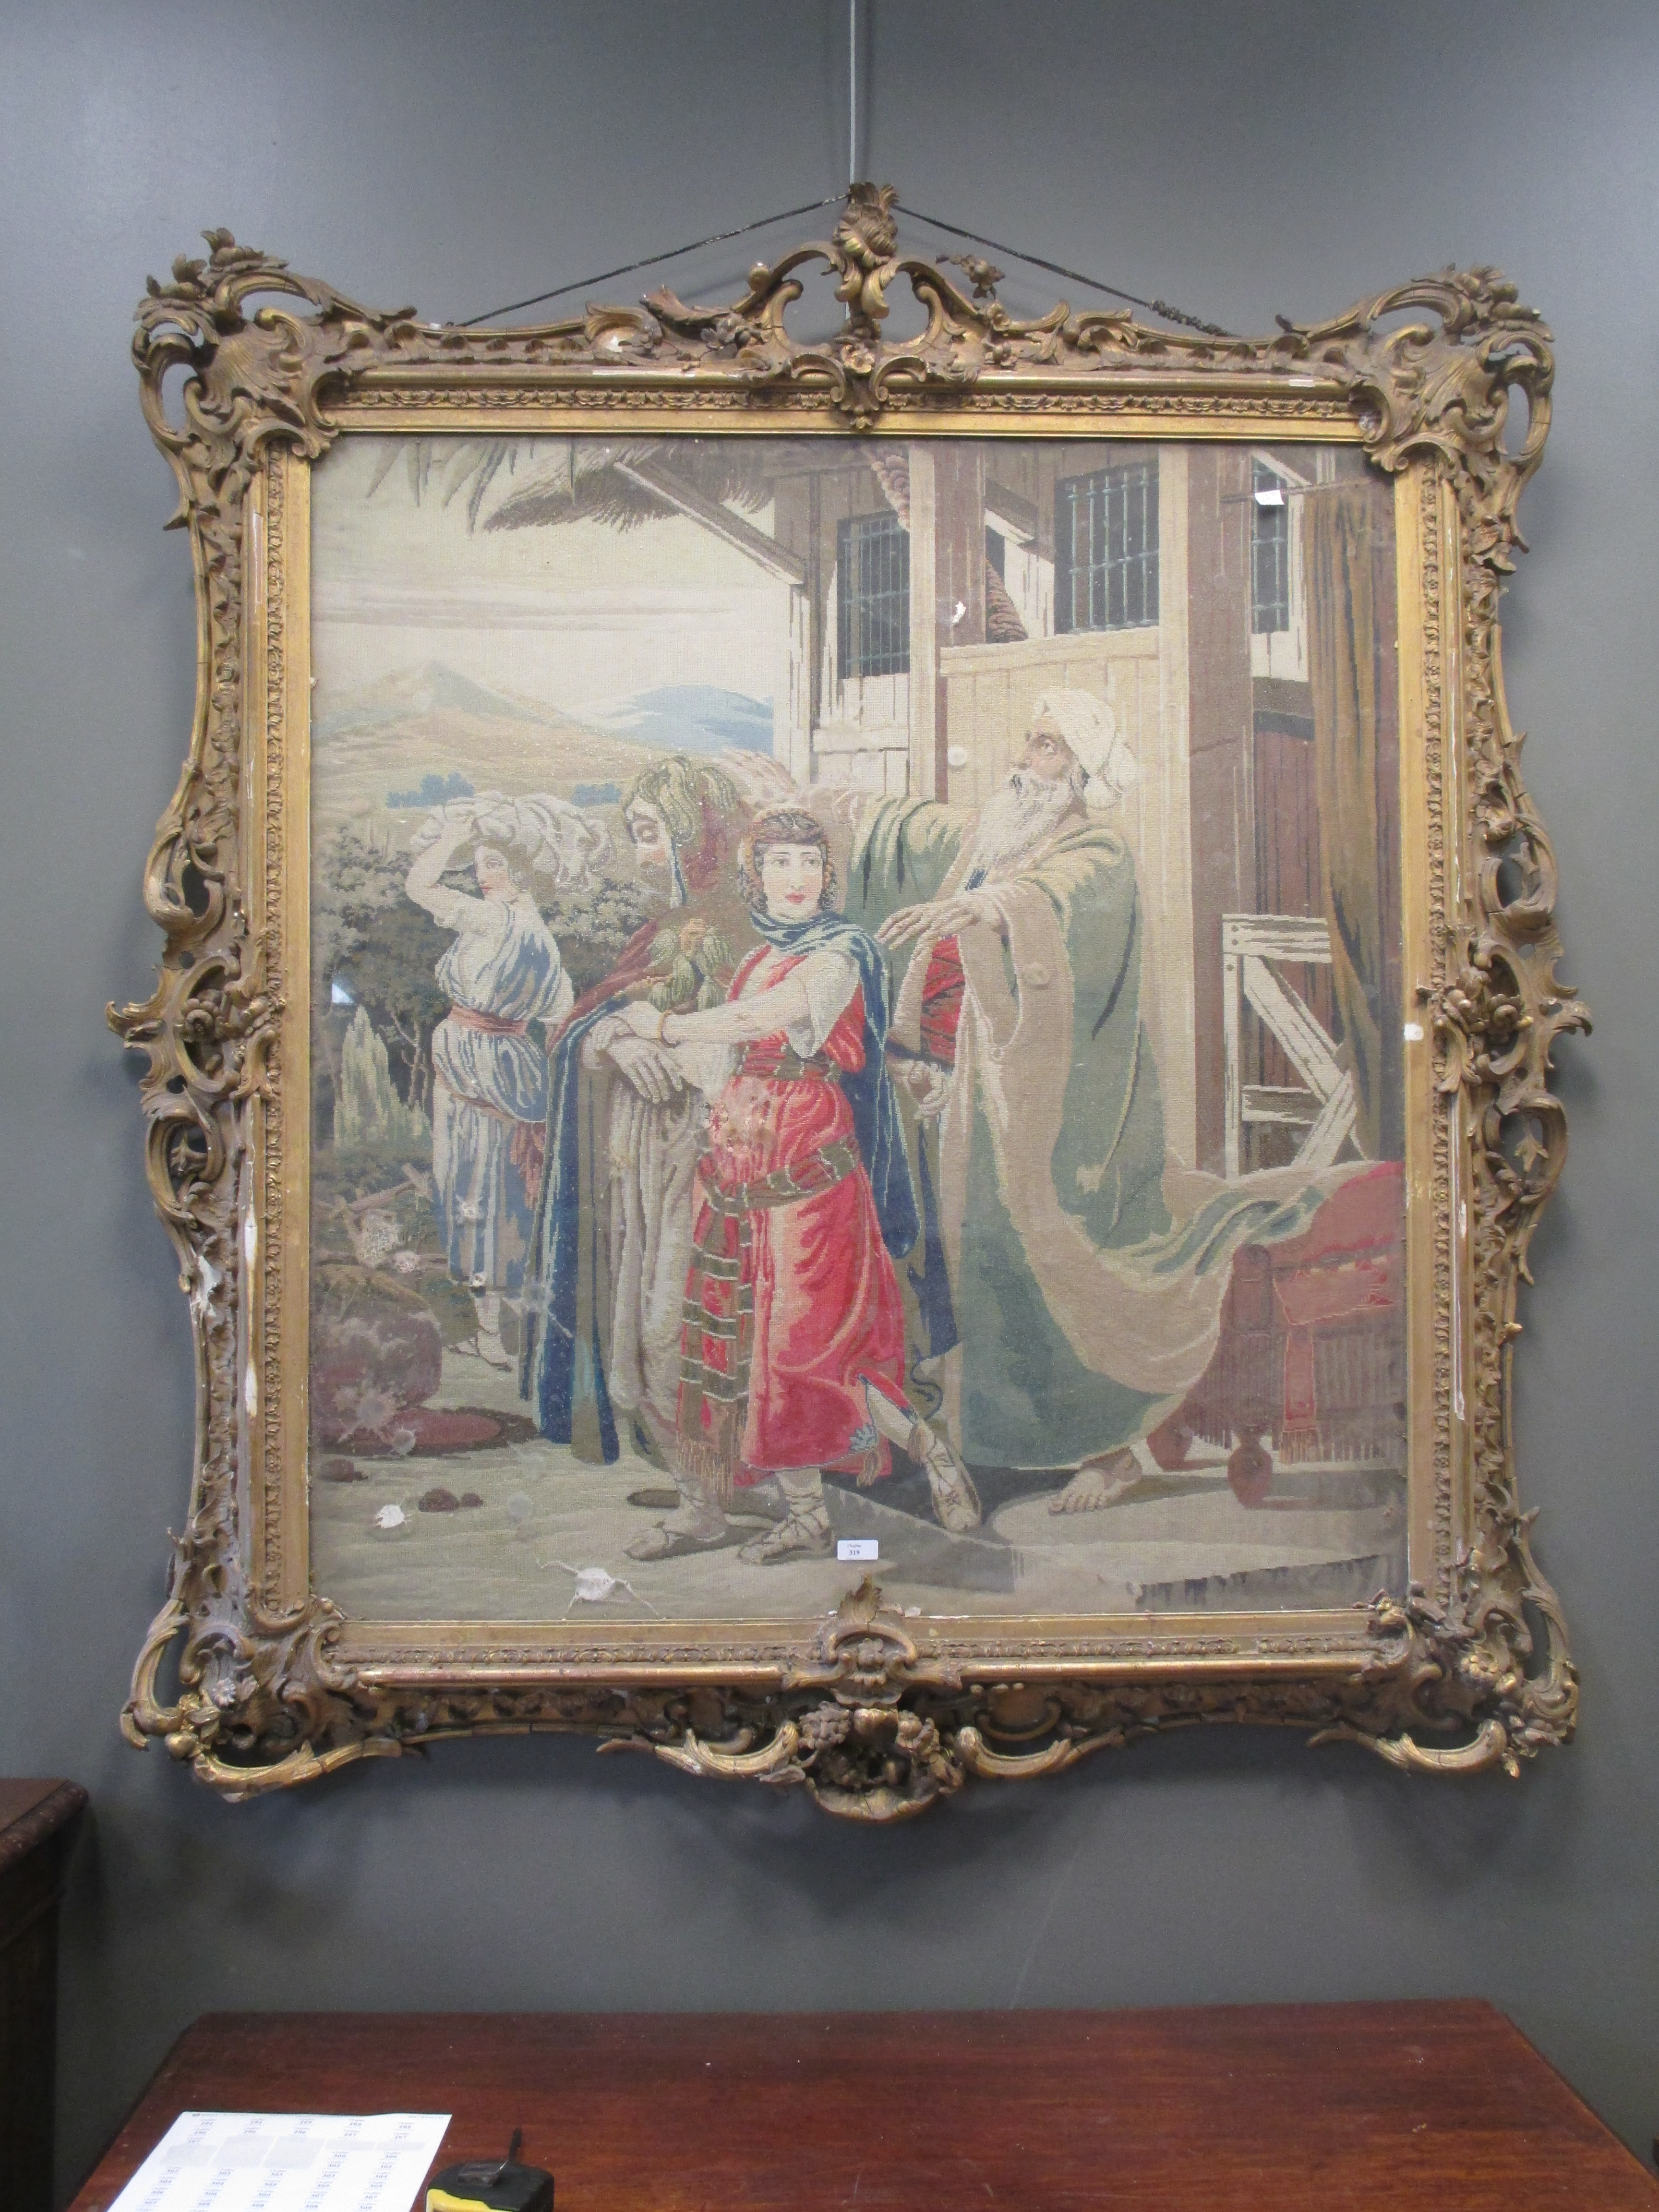 A large needlepoint of a Biblical scene in an ornate gilt frame, 143 x 133cm